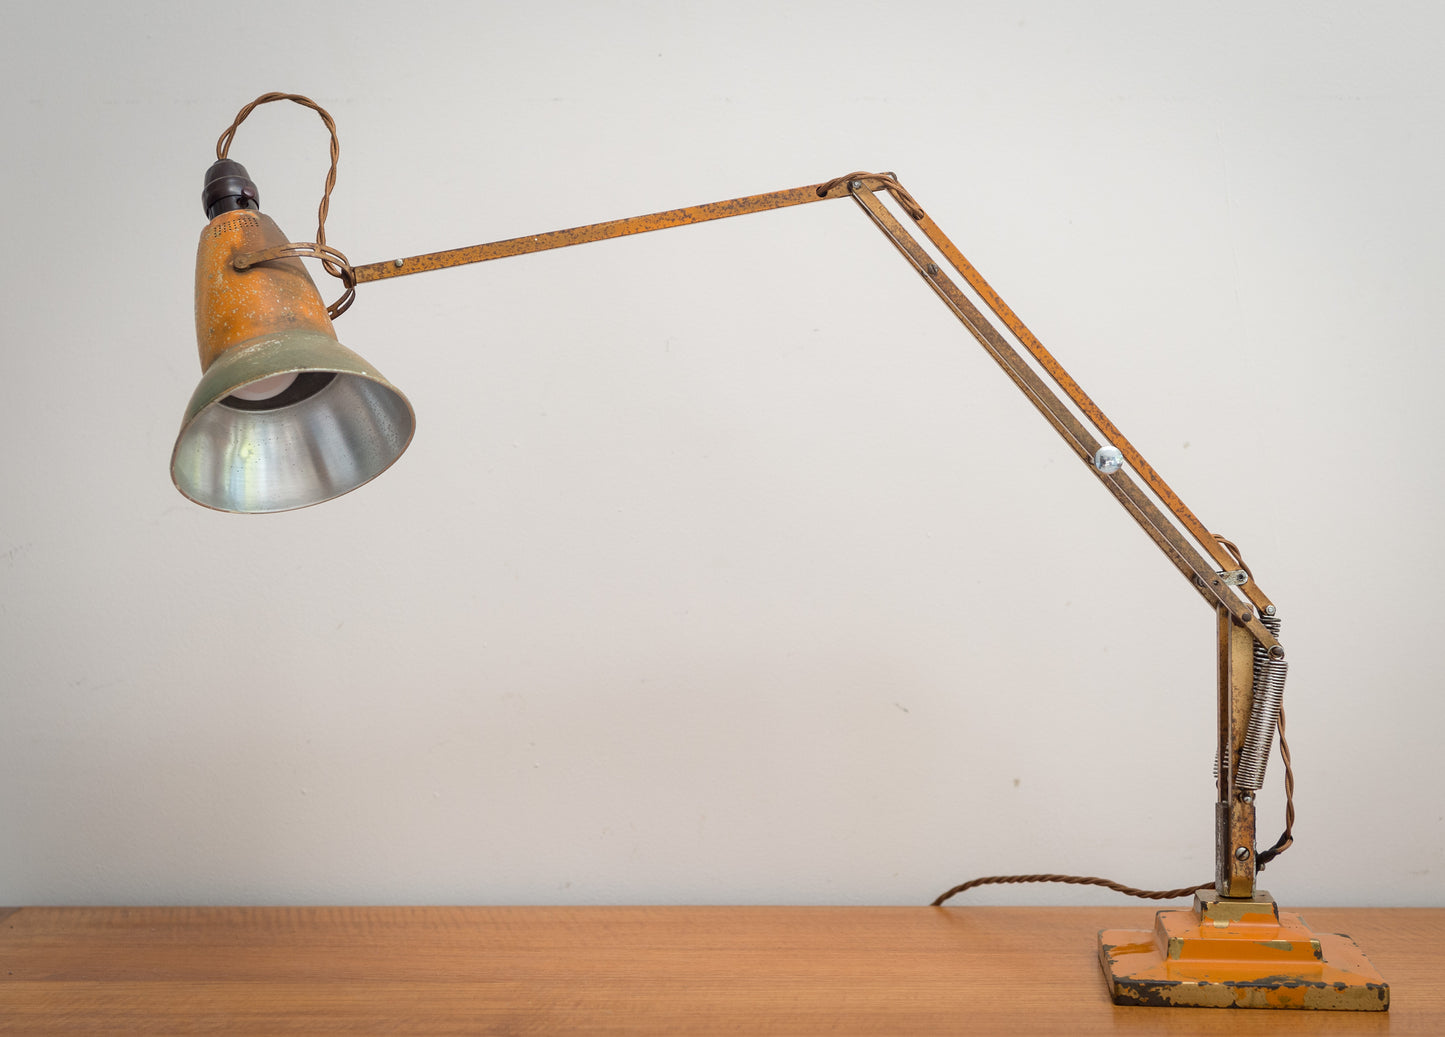 Superb 3 Step Anglepoise 1227 Desk Lamp by  Herbert Terry & sons.